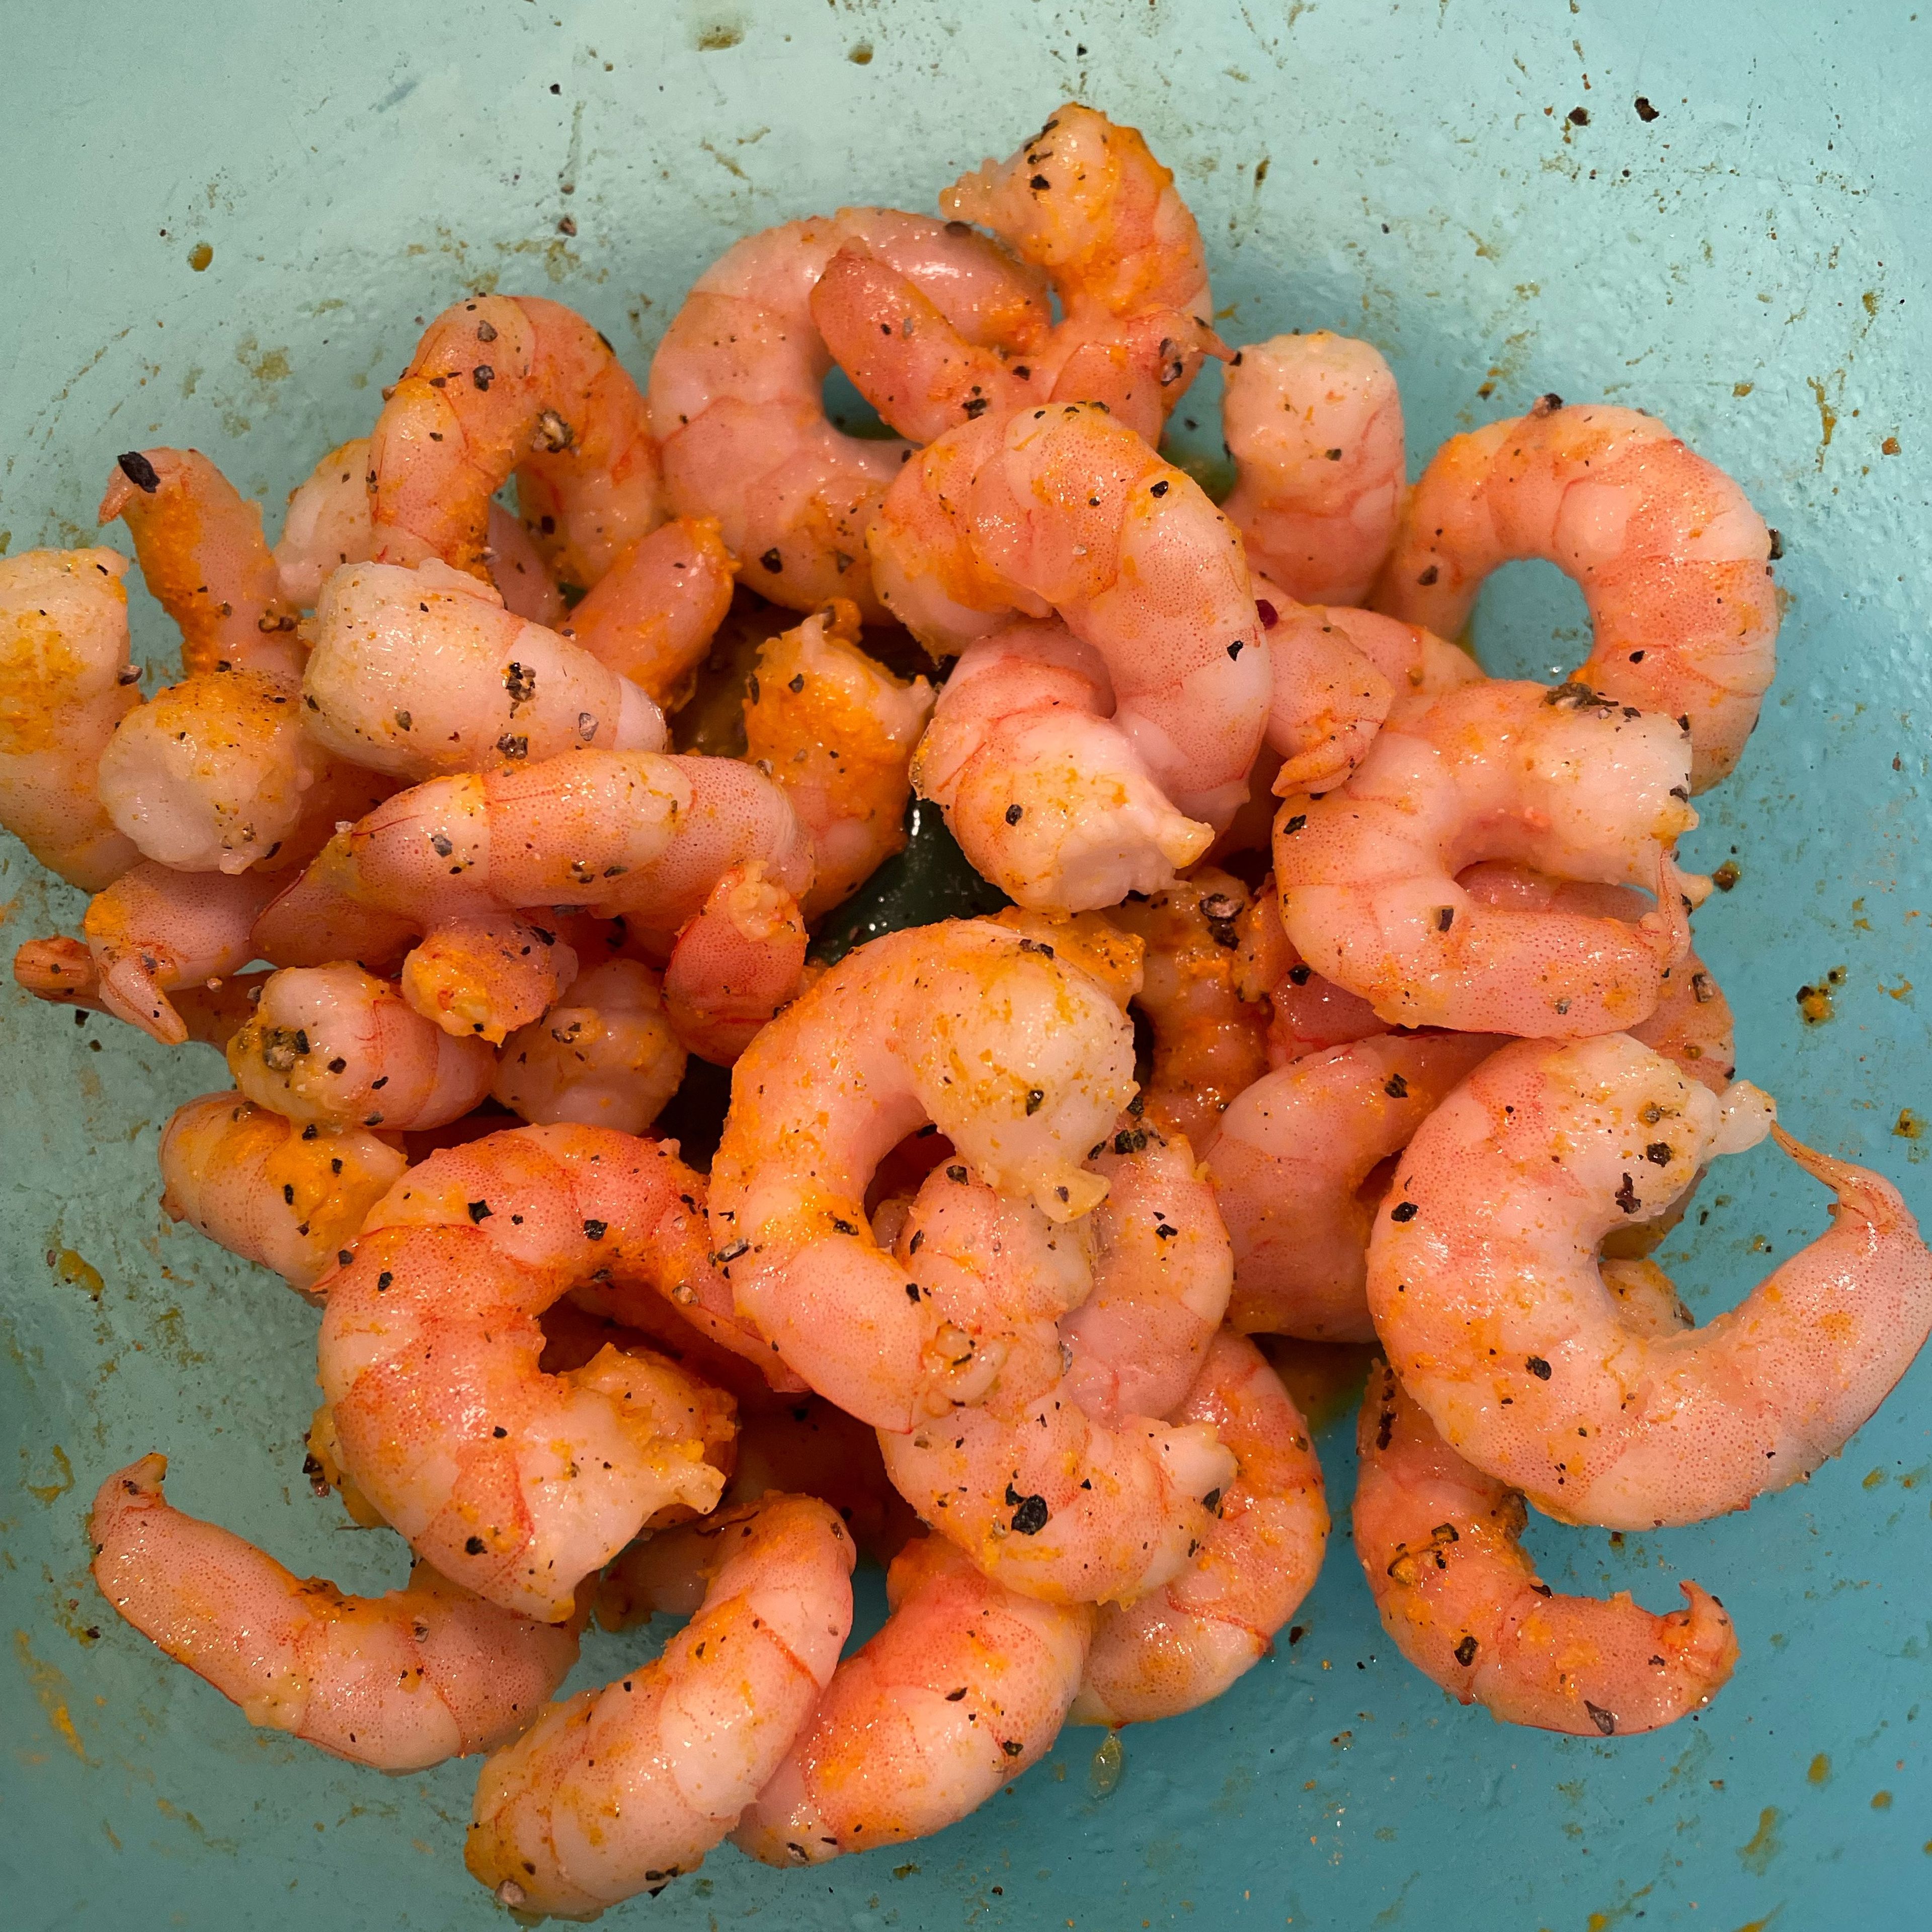 Marinate prawns with lemon juice, black pepper, turmeric and salt while preparing the other ingredients.